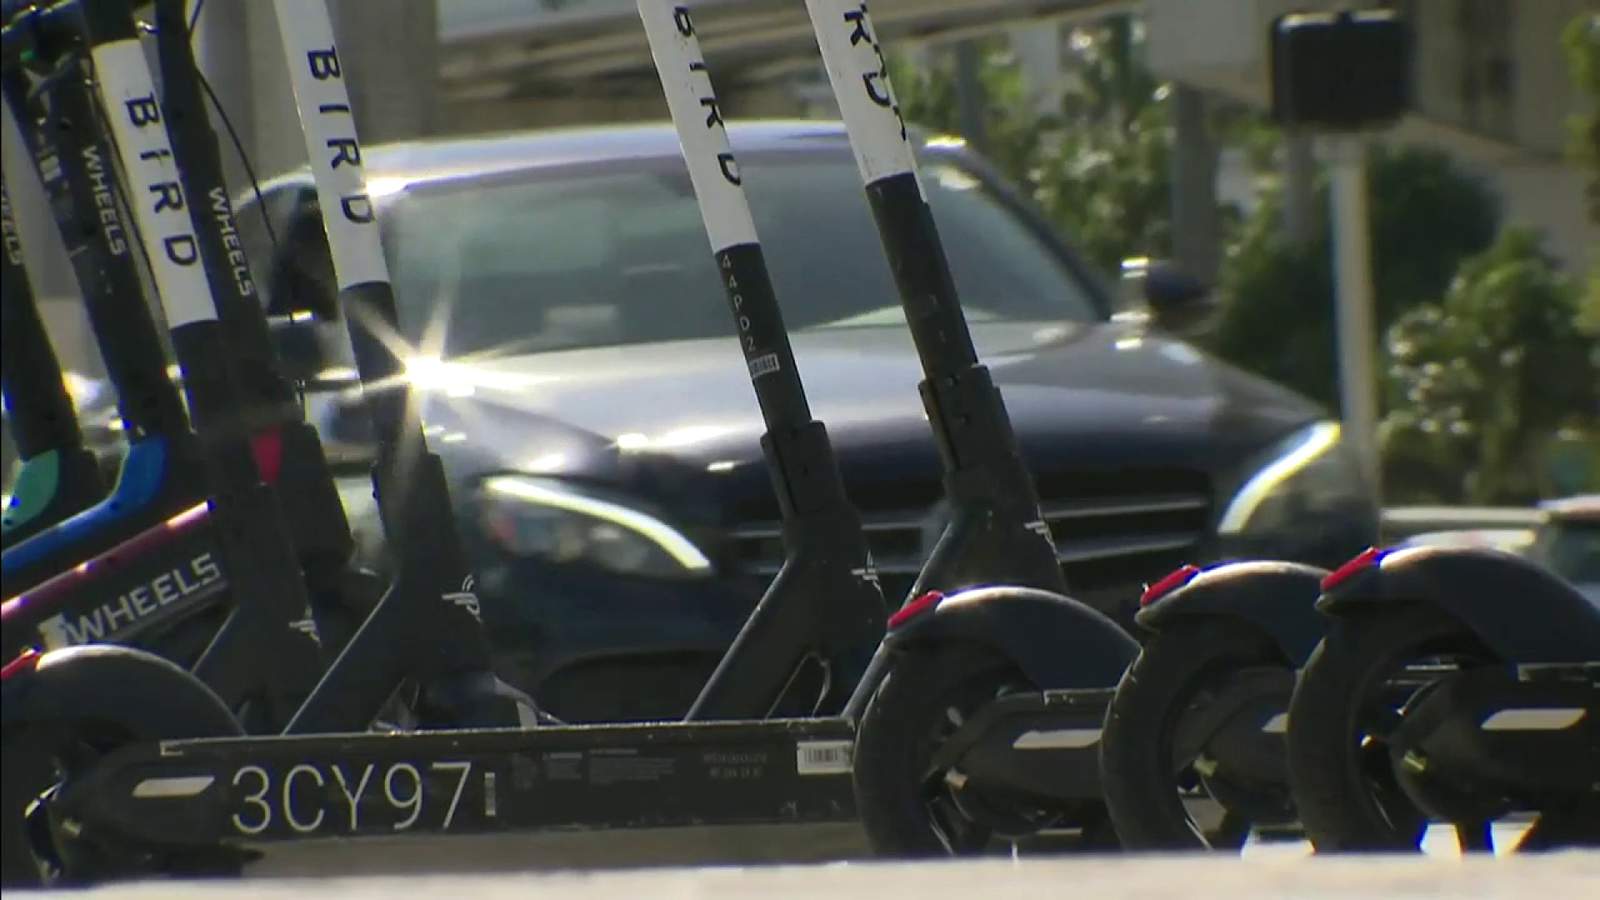 Suspension of Miami scooter pilot program has some happy, others sad